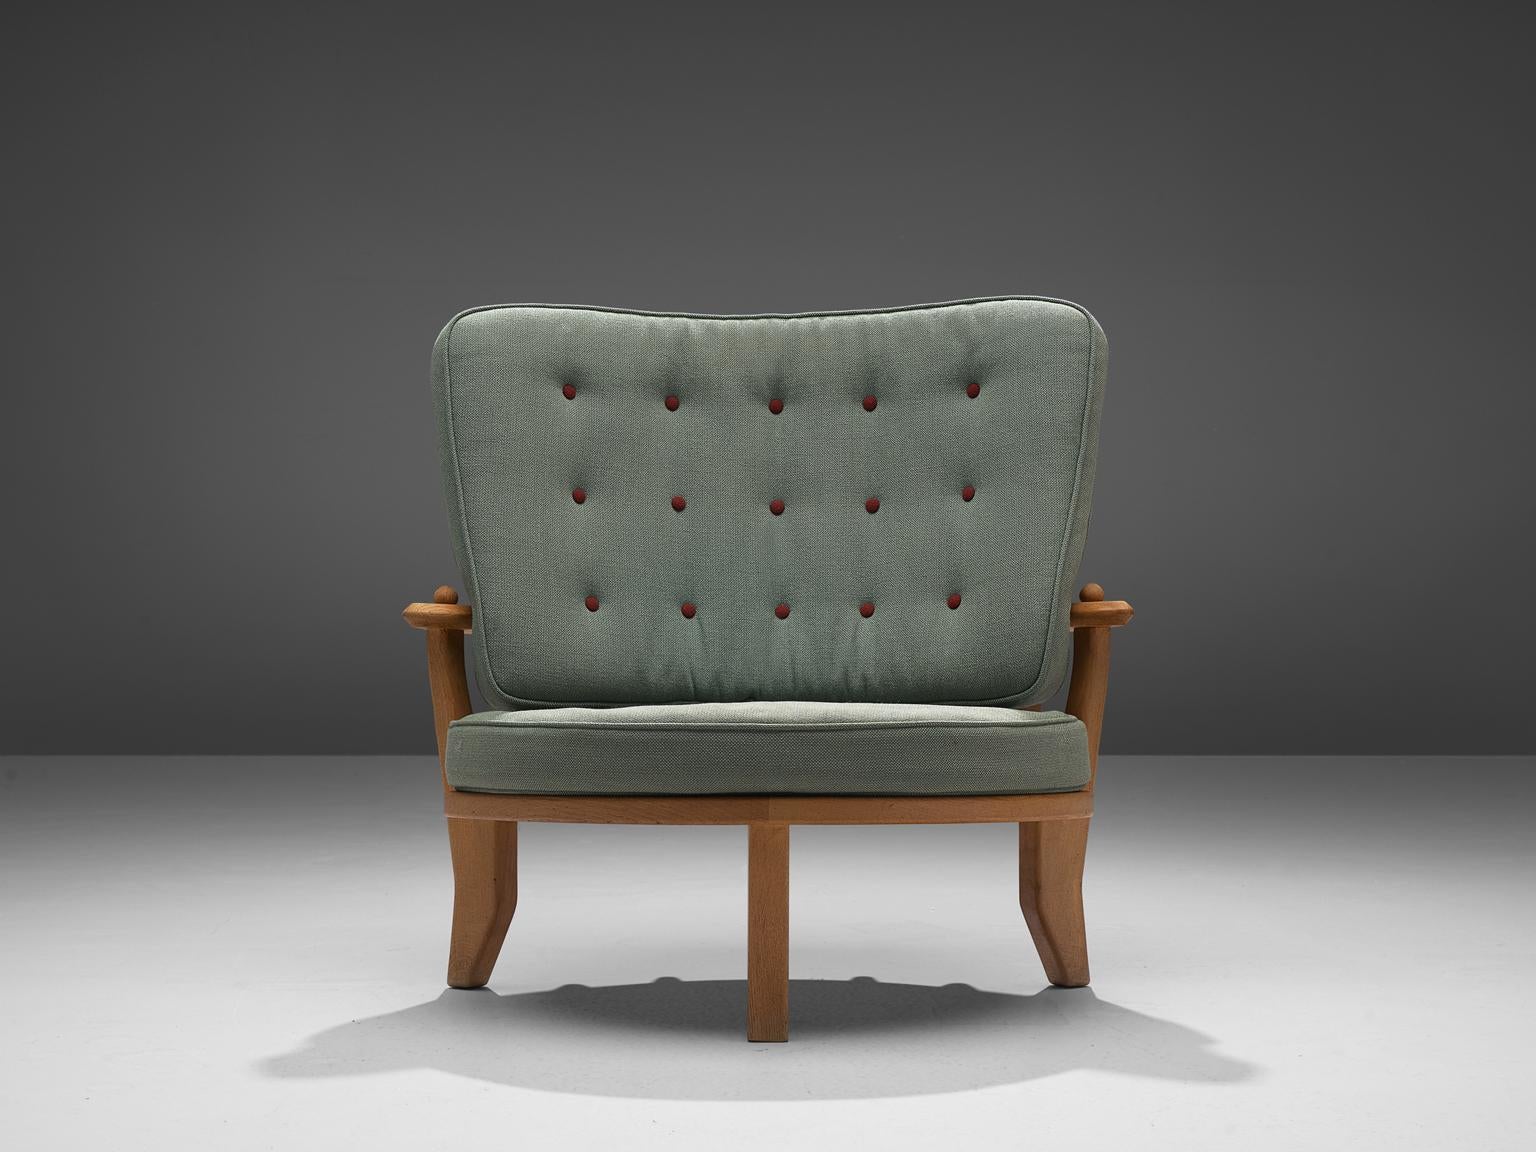 Guillerme et Chambron, lounge chair, oak, green upholstery, France, 1940s. 

This lounge chair or love chair has a classic Guillerme & Chambron style. It is bulky but beautifully made, with attention to detail and comfort. Guillerme and Chambron